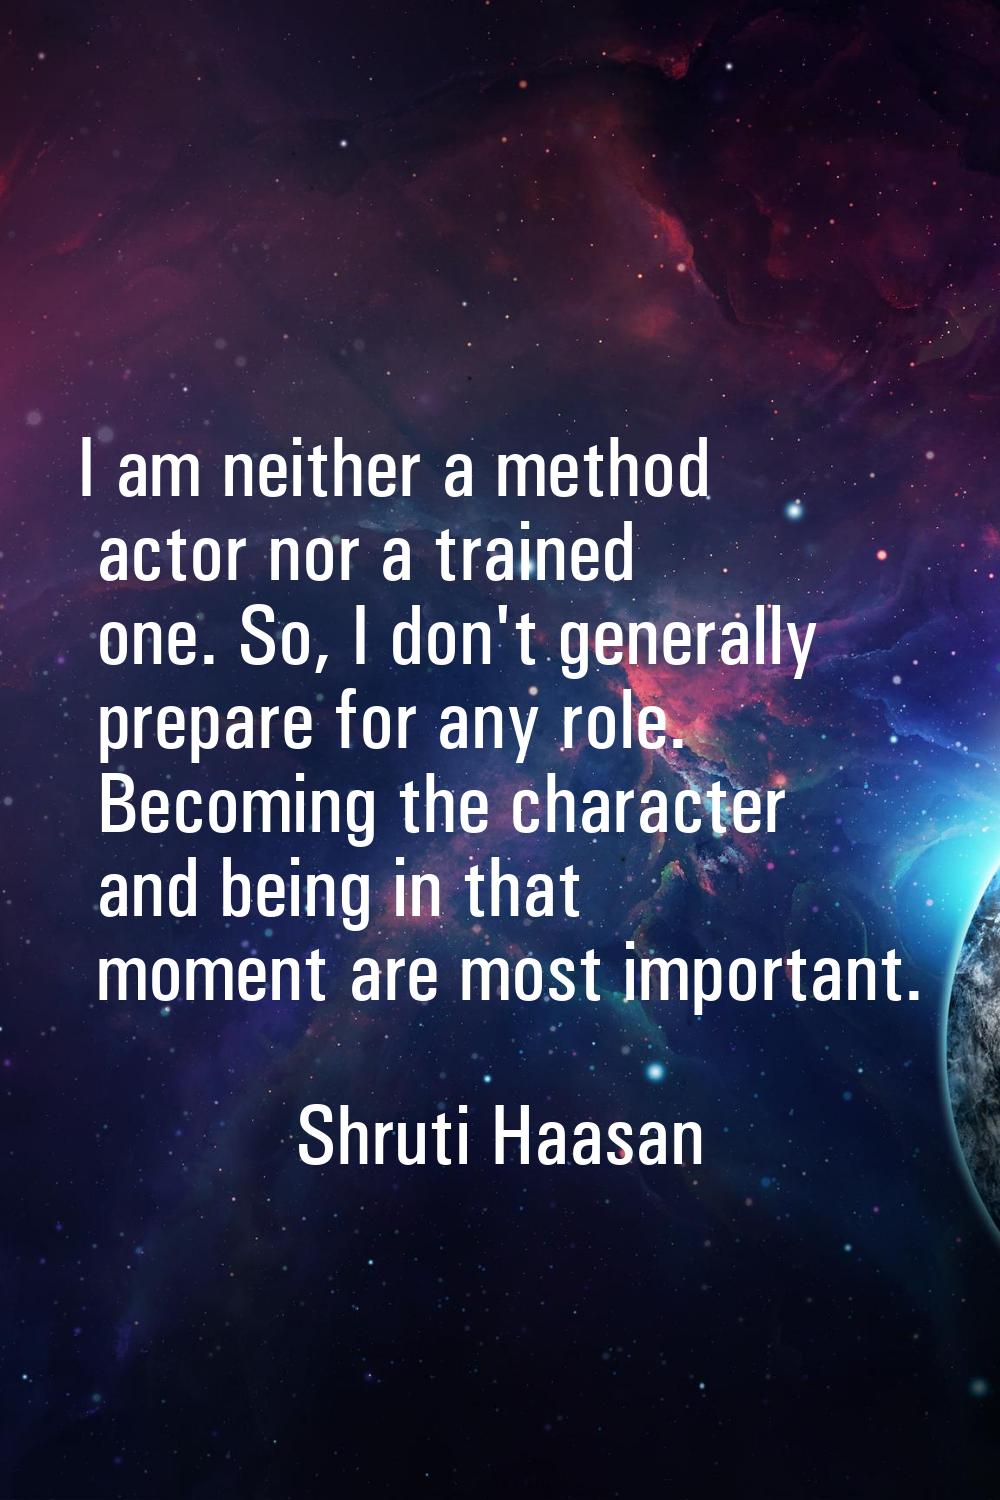 I am neither a method actor nor a trained one. So, I don't generally prepare for any role. Becoming